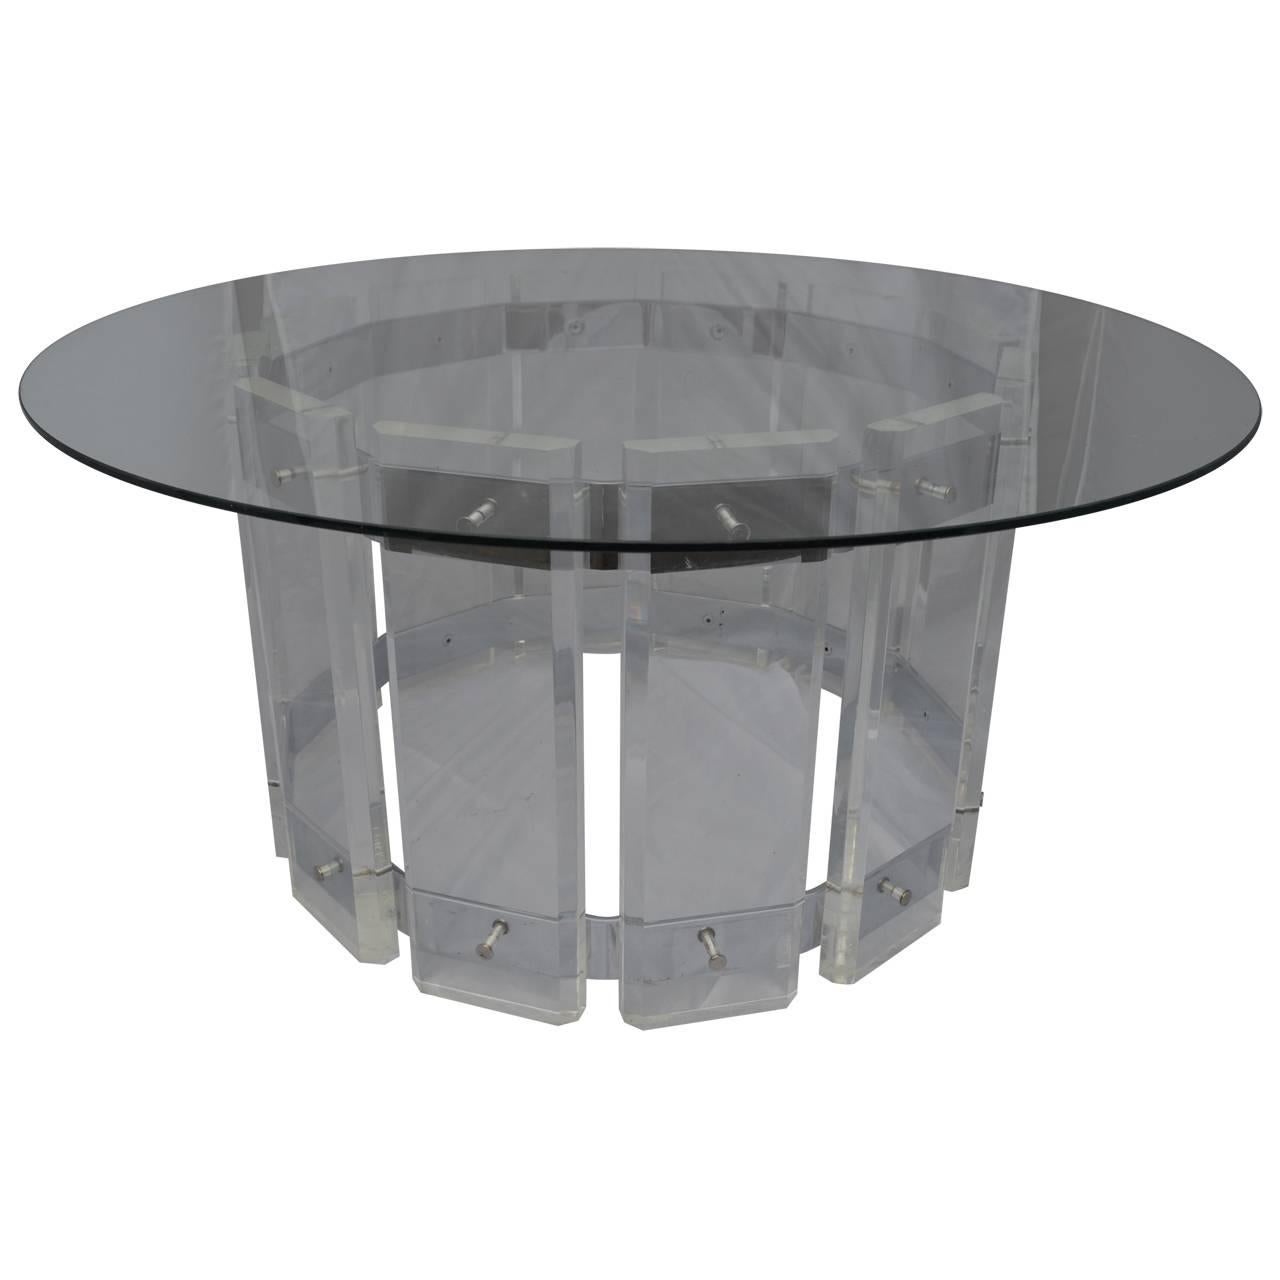 American Mid-Century Modern Round Lucite Glass Top Table